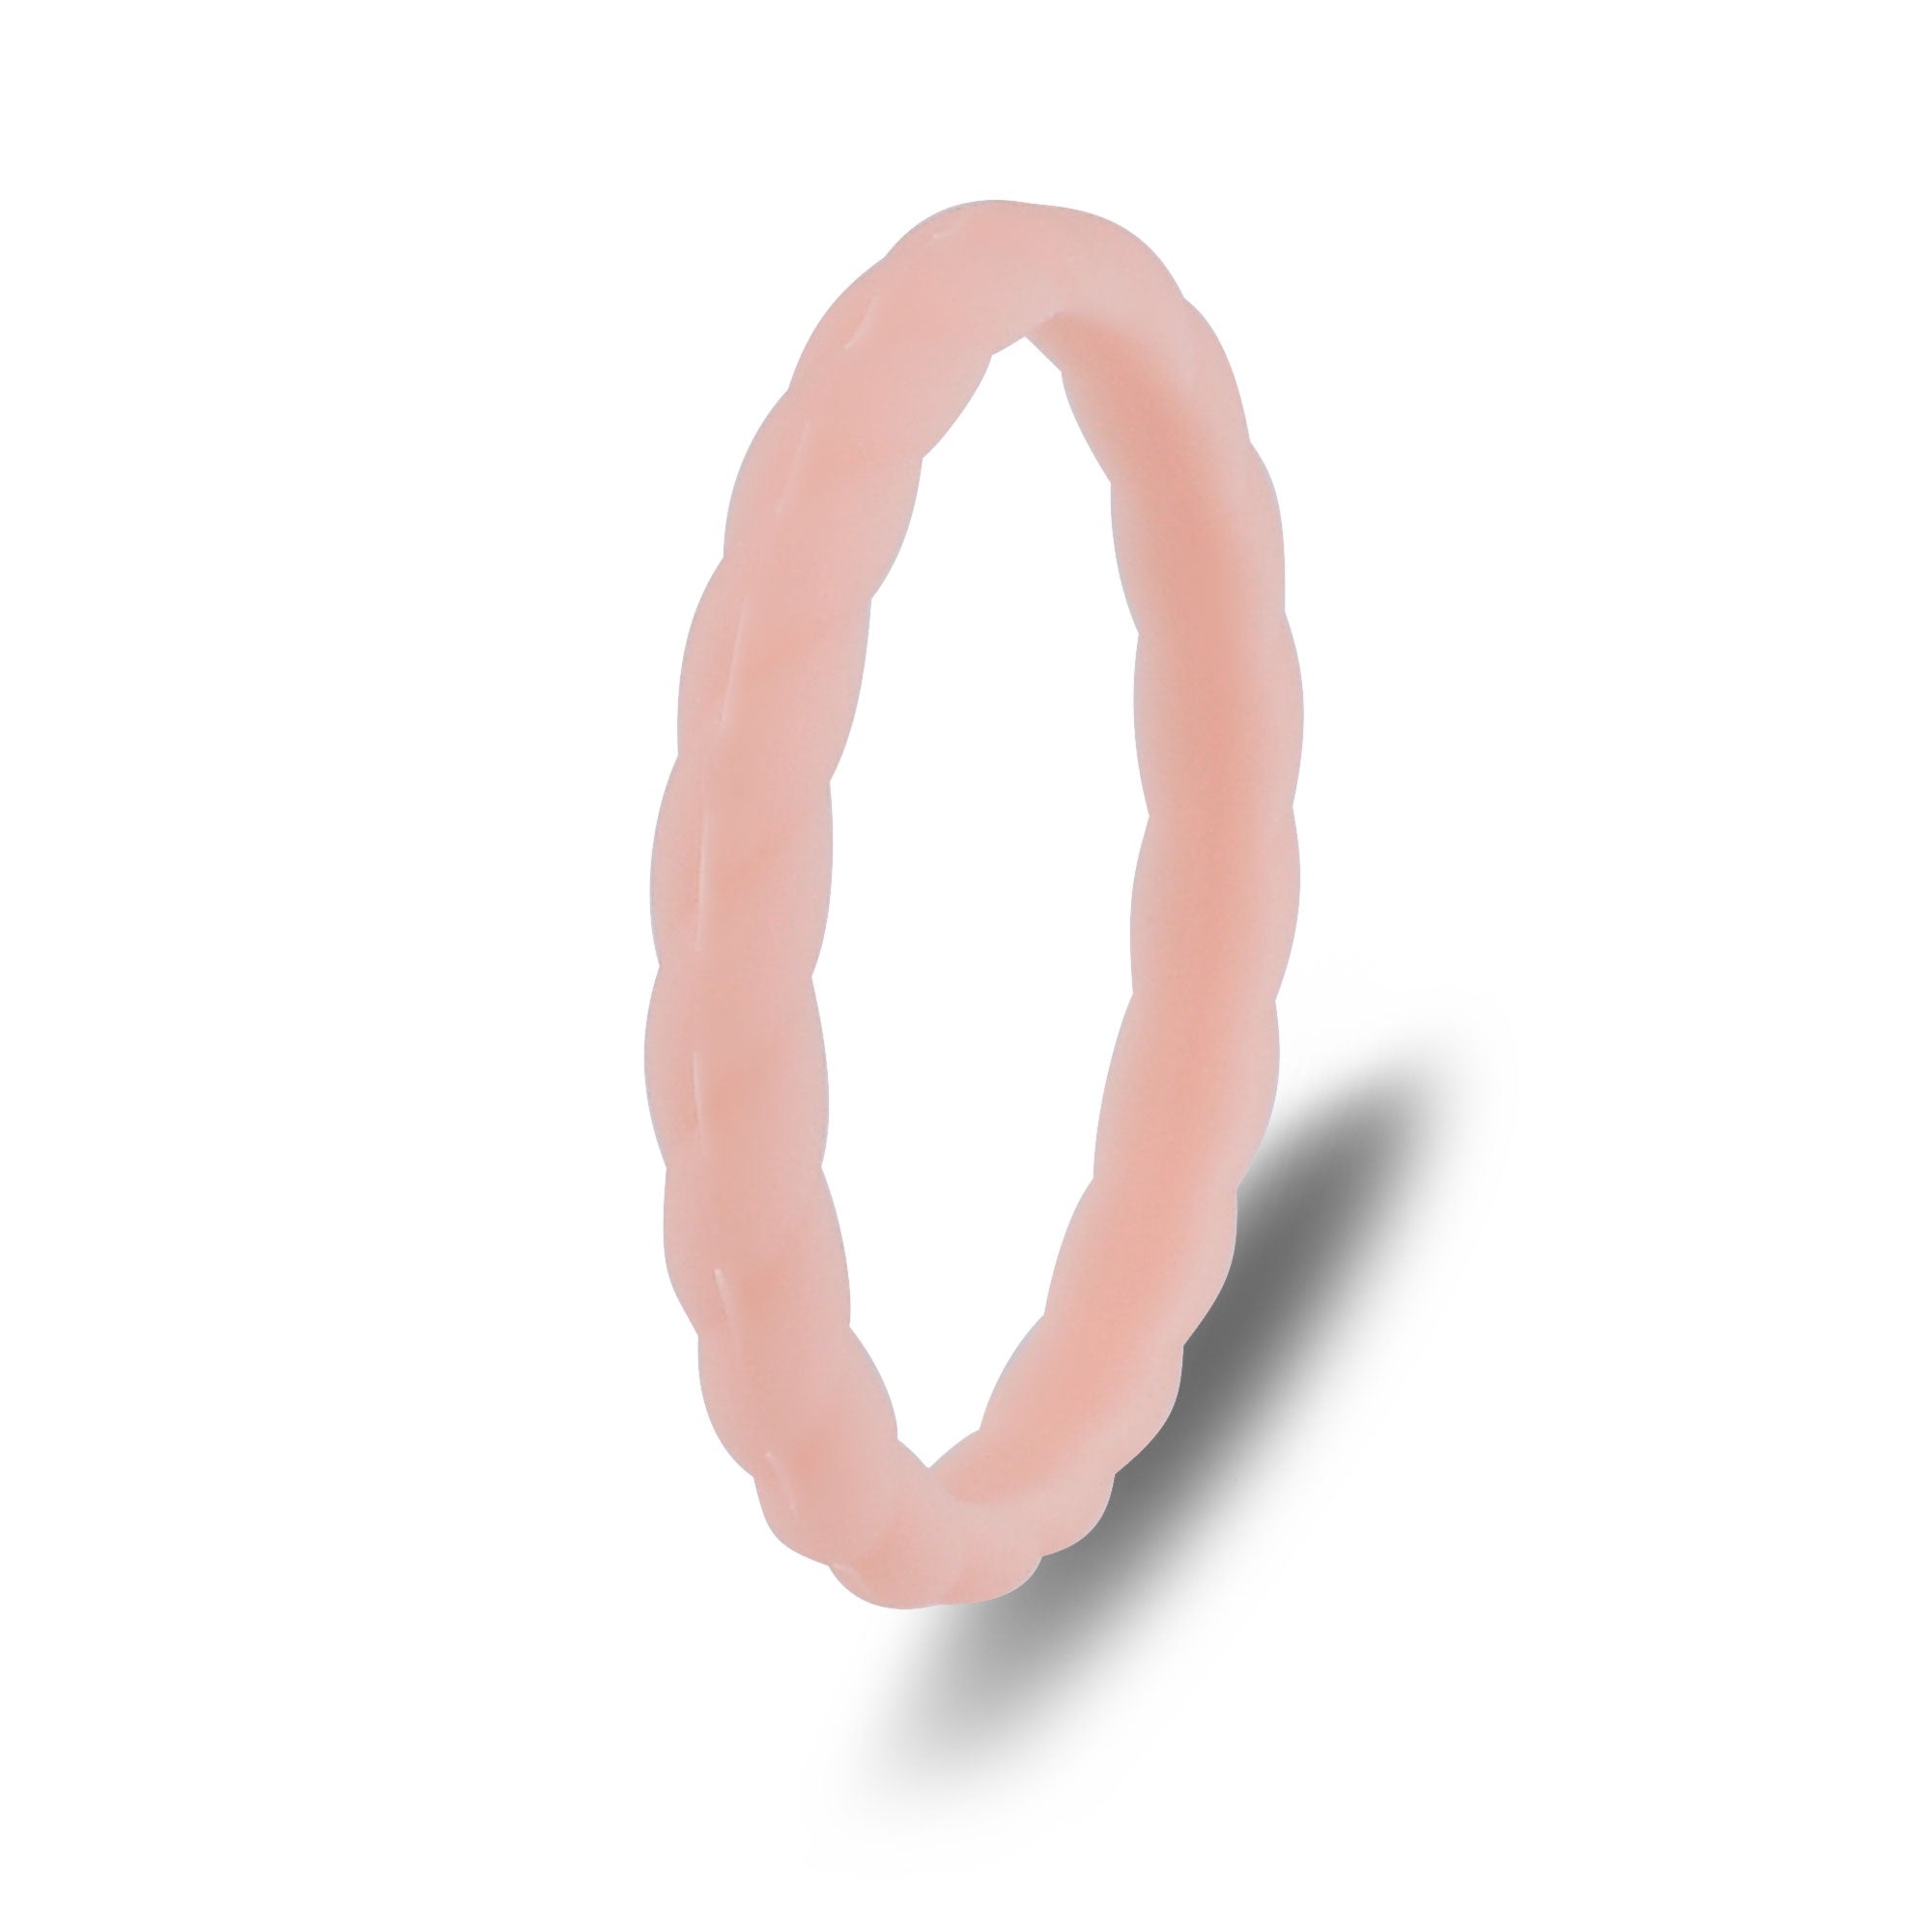 The Cotton Candy - Silicone Ring